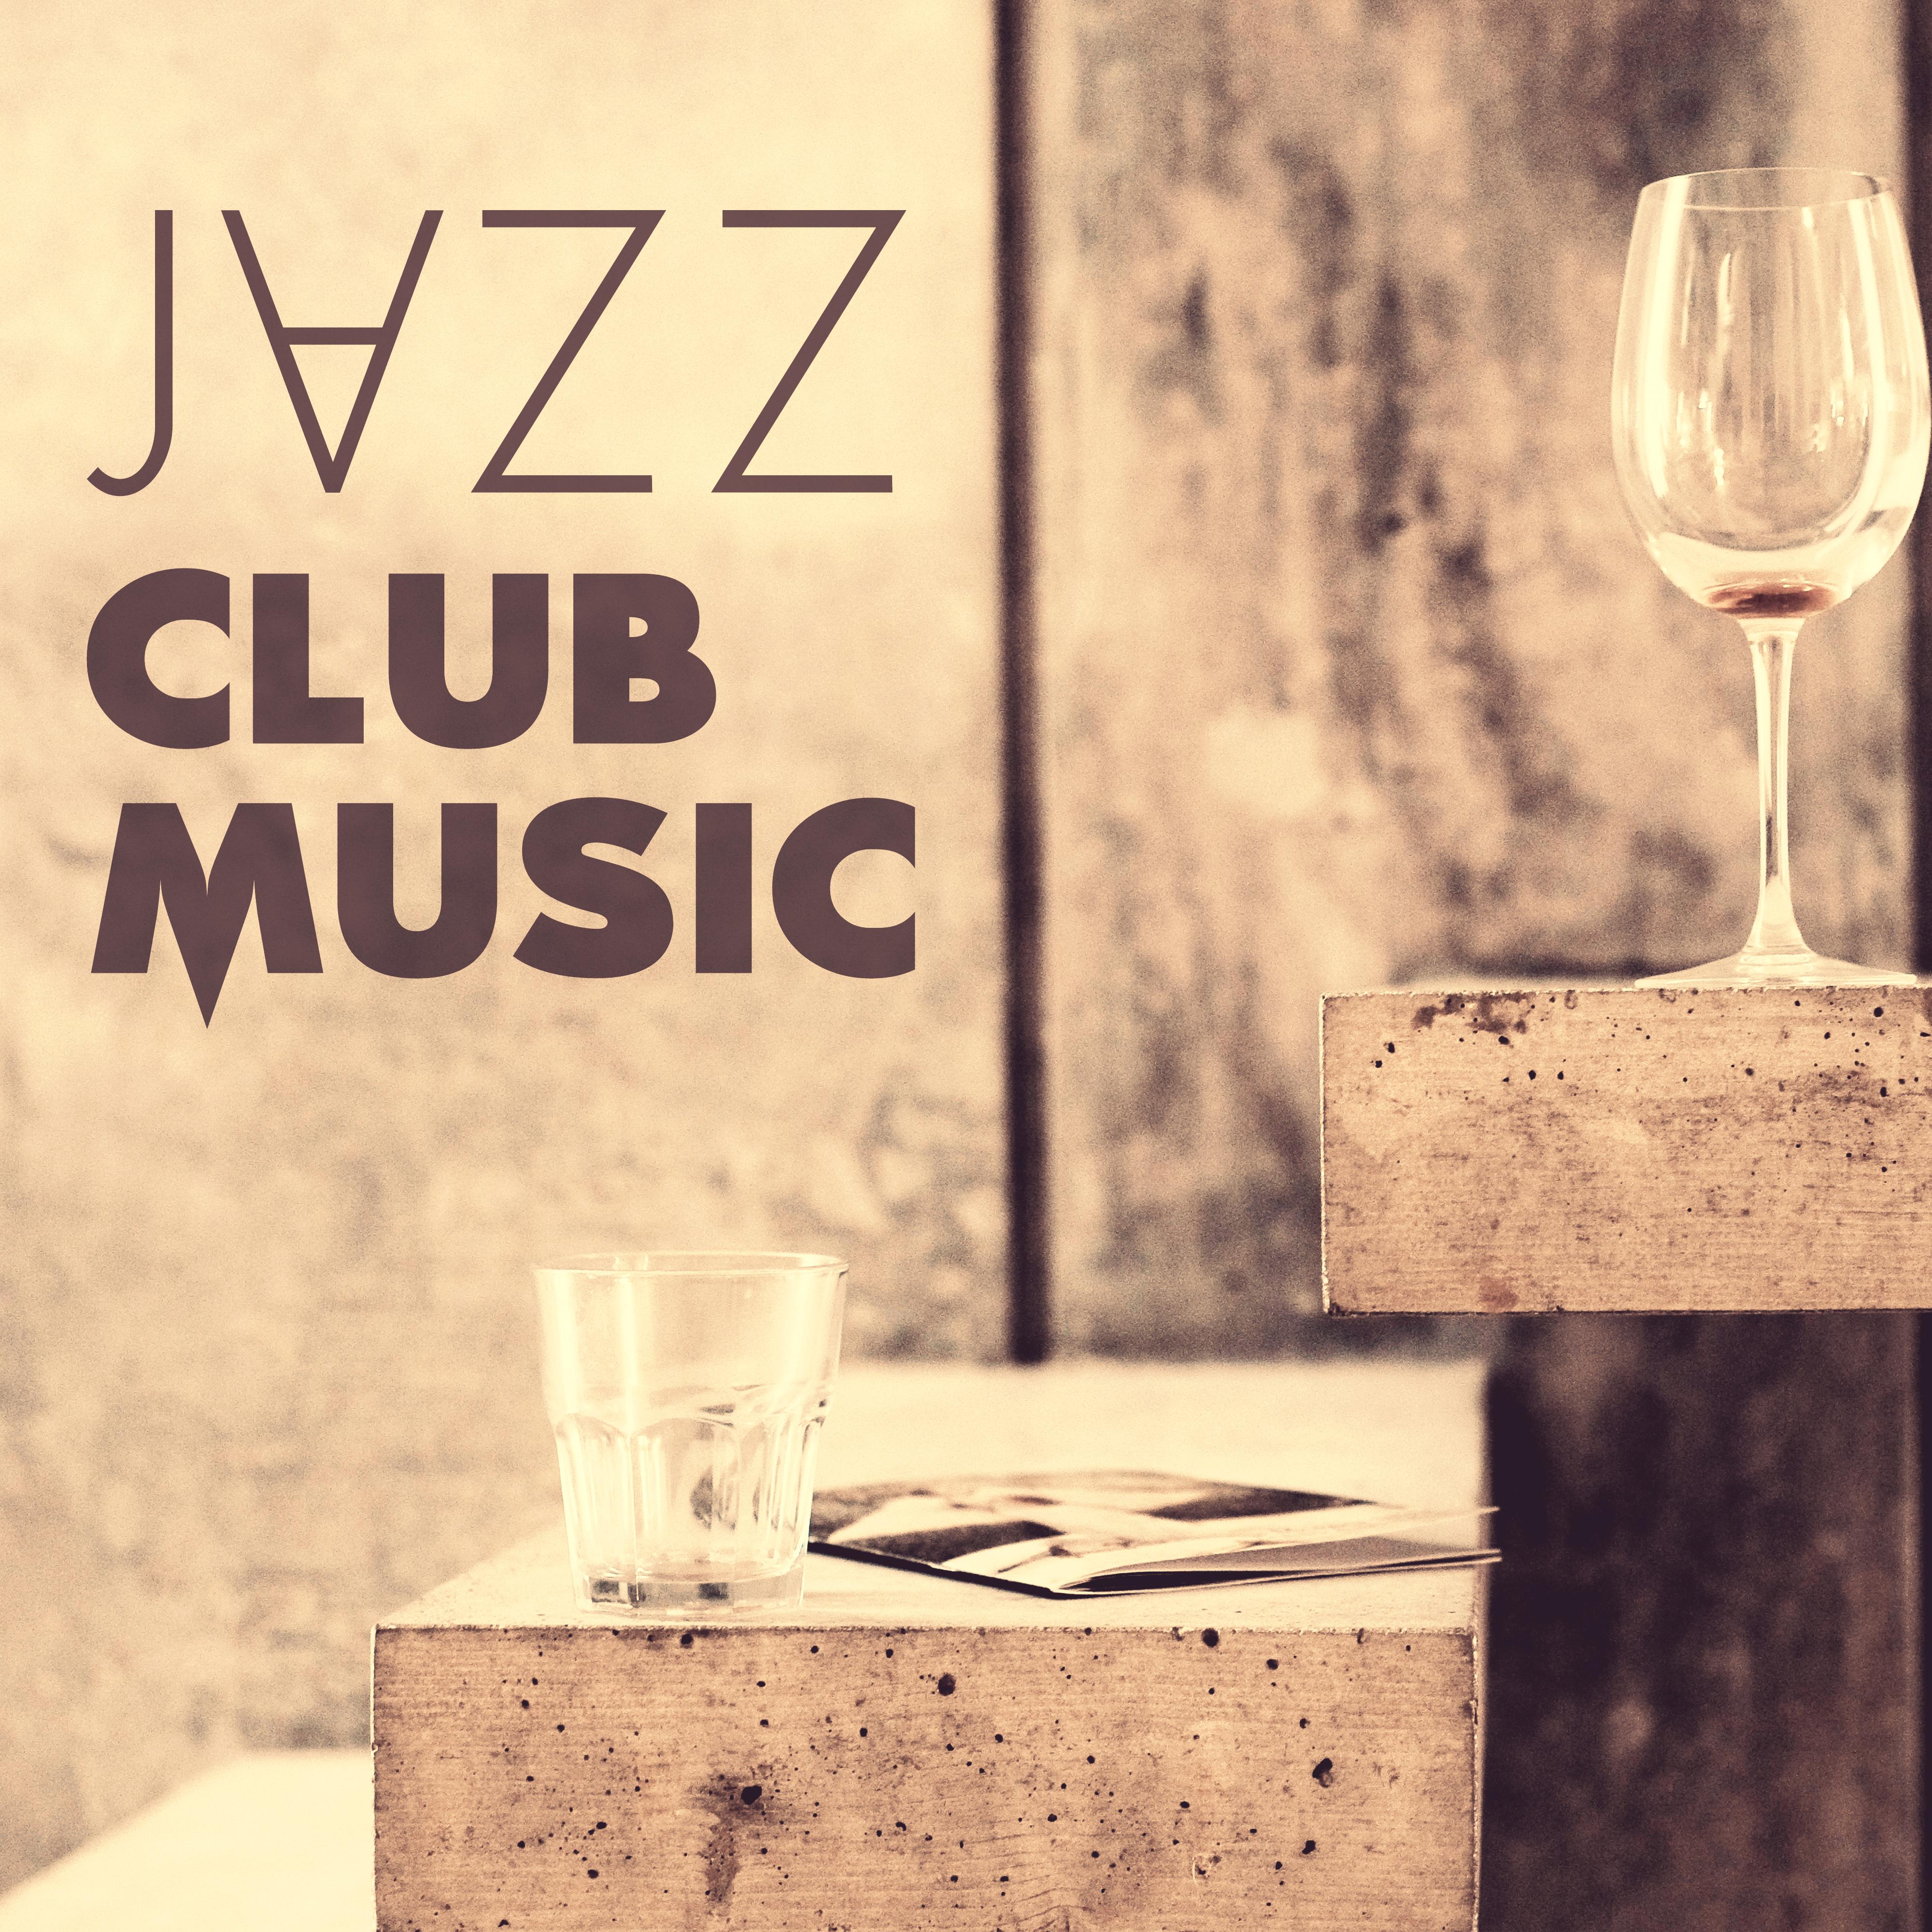 Jazz Club Music  Best Jazz Music for Club  Bar, Instrumental Piano Jazz Music, Easy Listening Piano Bar, Cocktail Party, Dinner Party Music